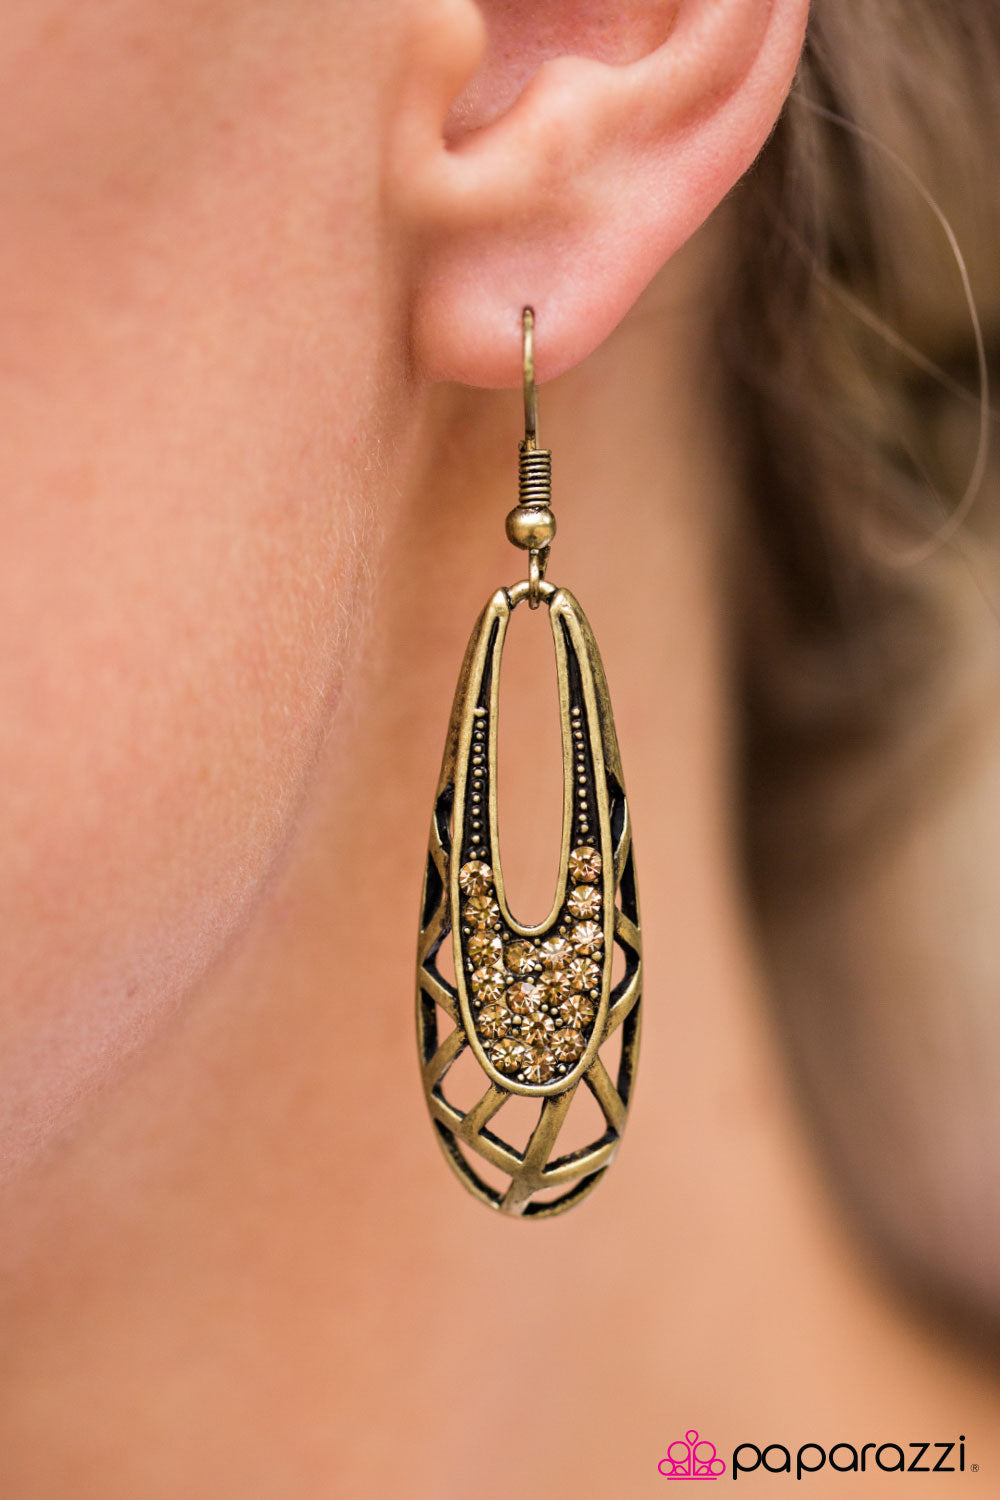 Paparazzi Accessories So DIVA-ous! - Brass Earrings